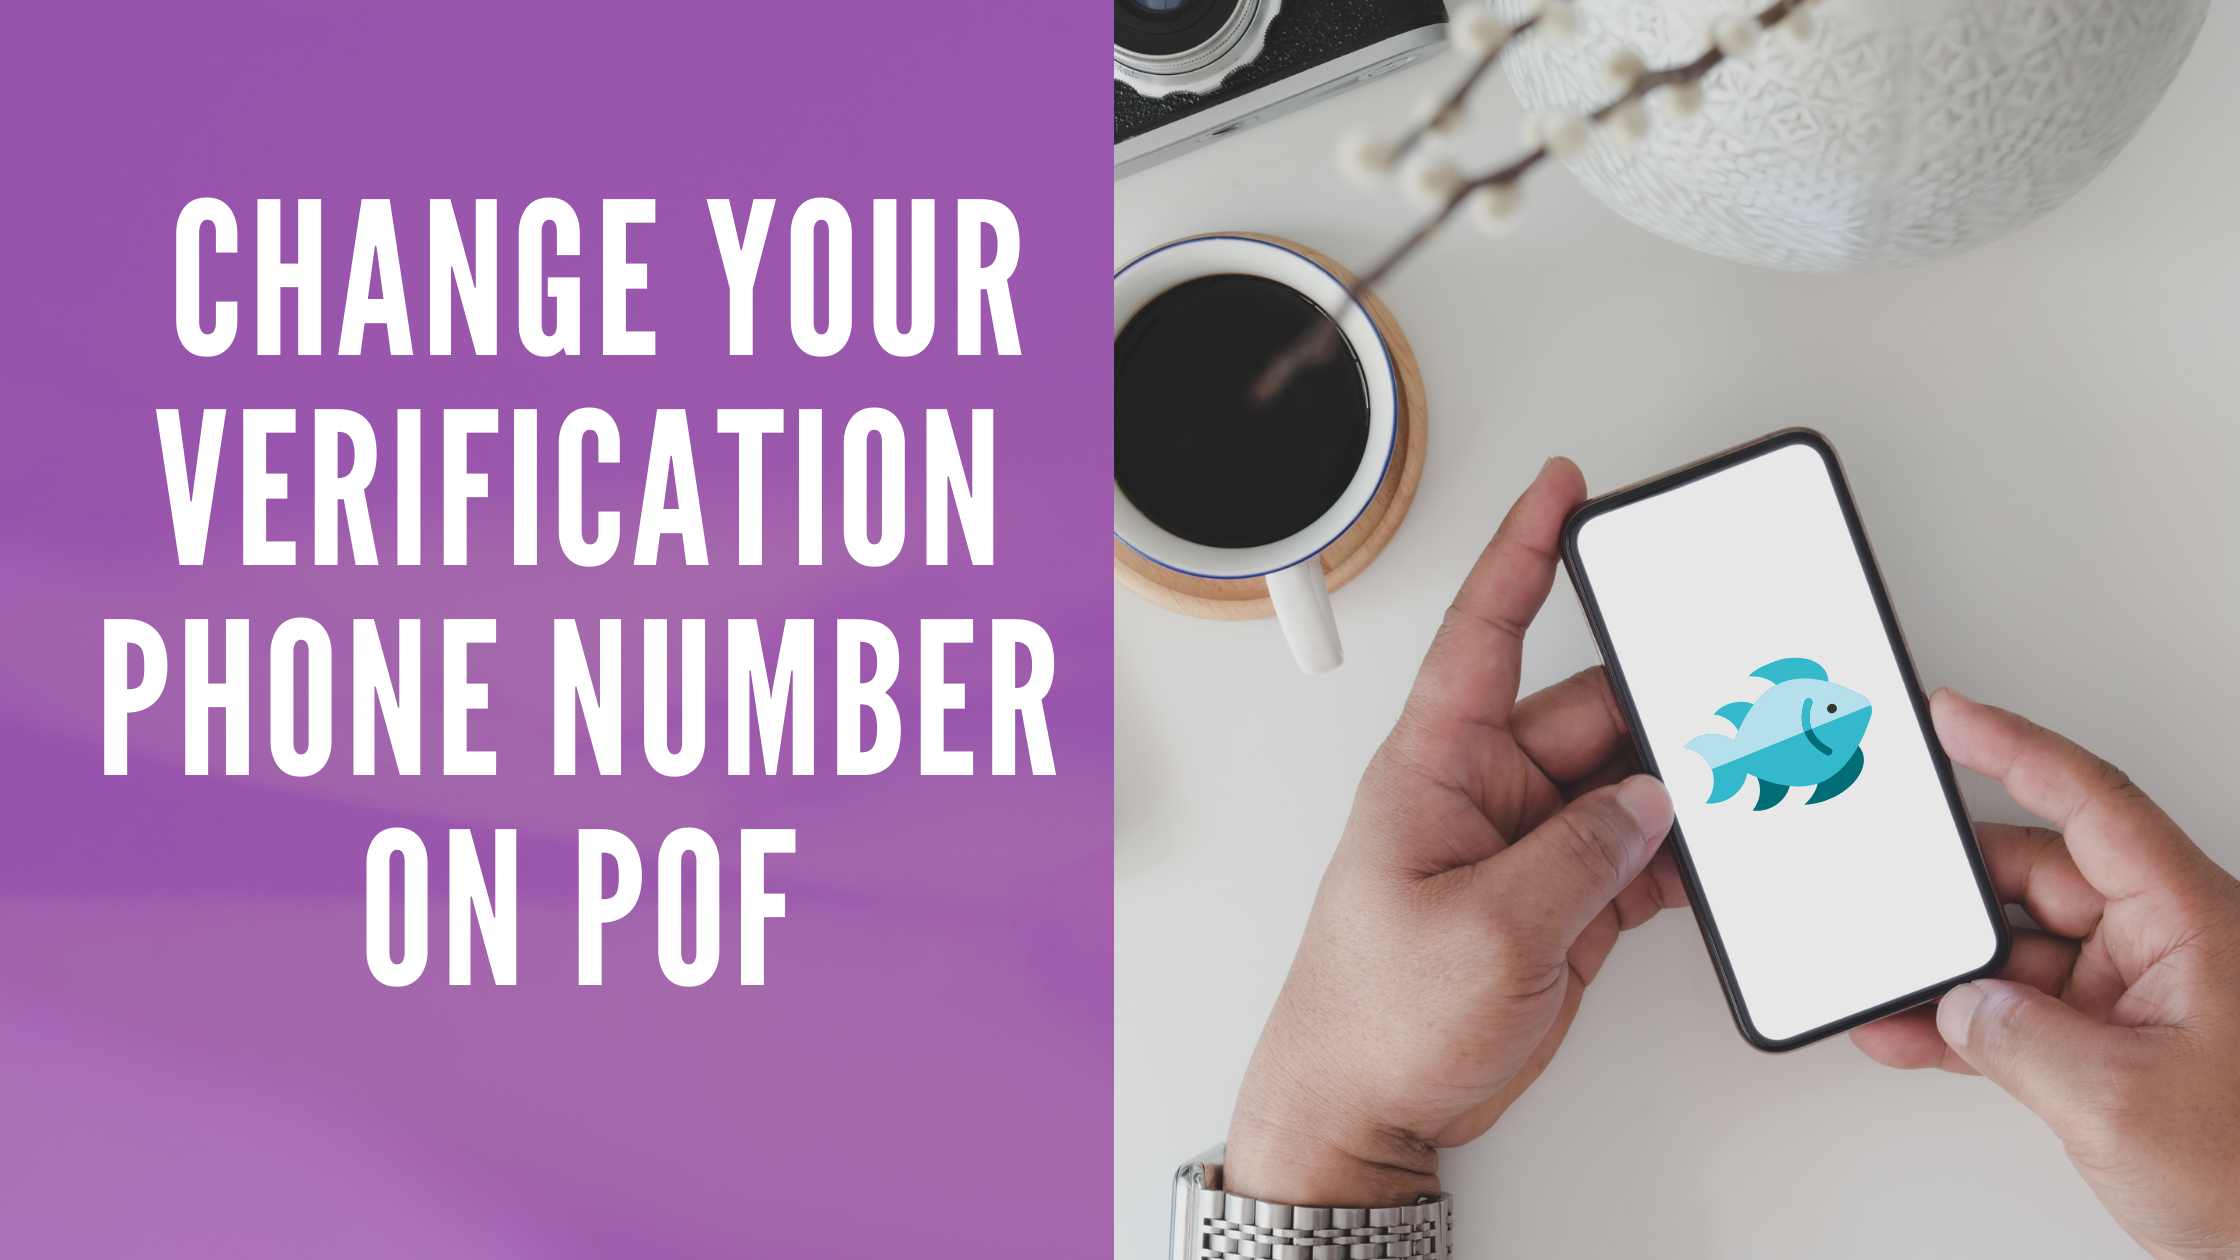 How To Change Your Verification Phone Number On POF